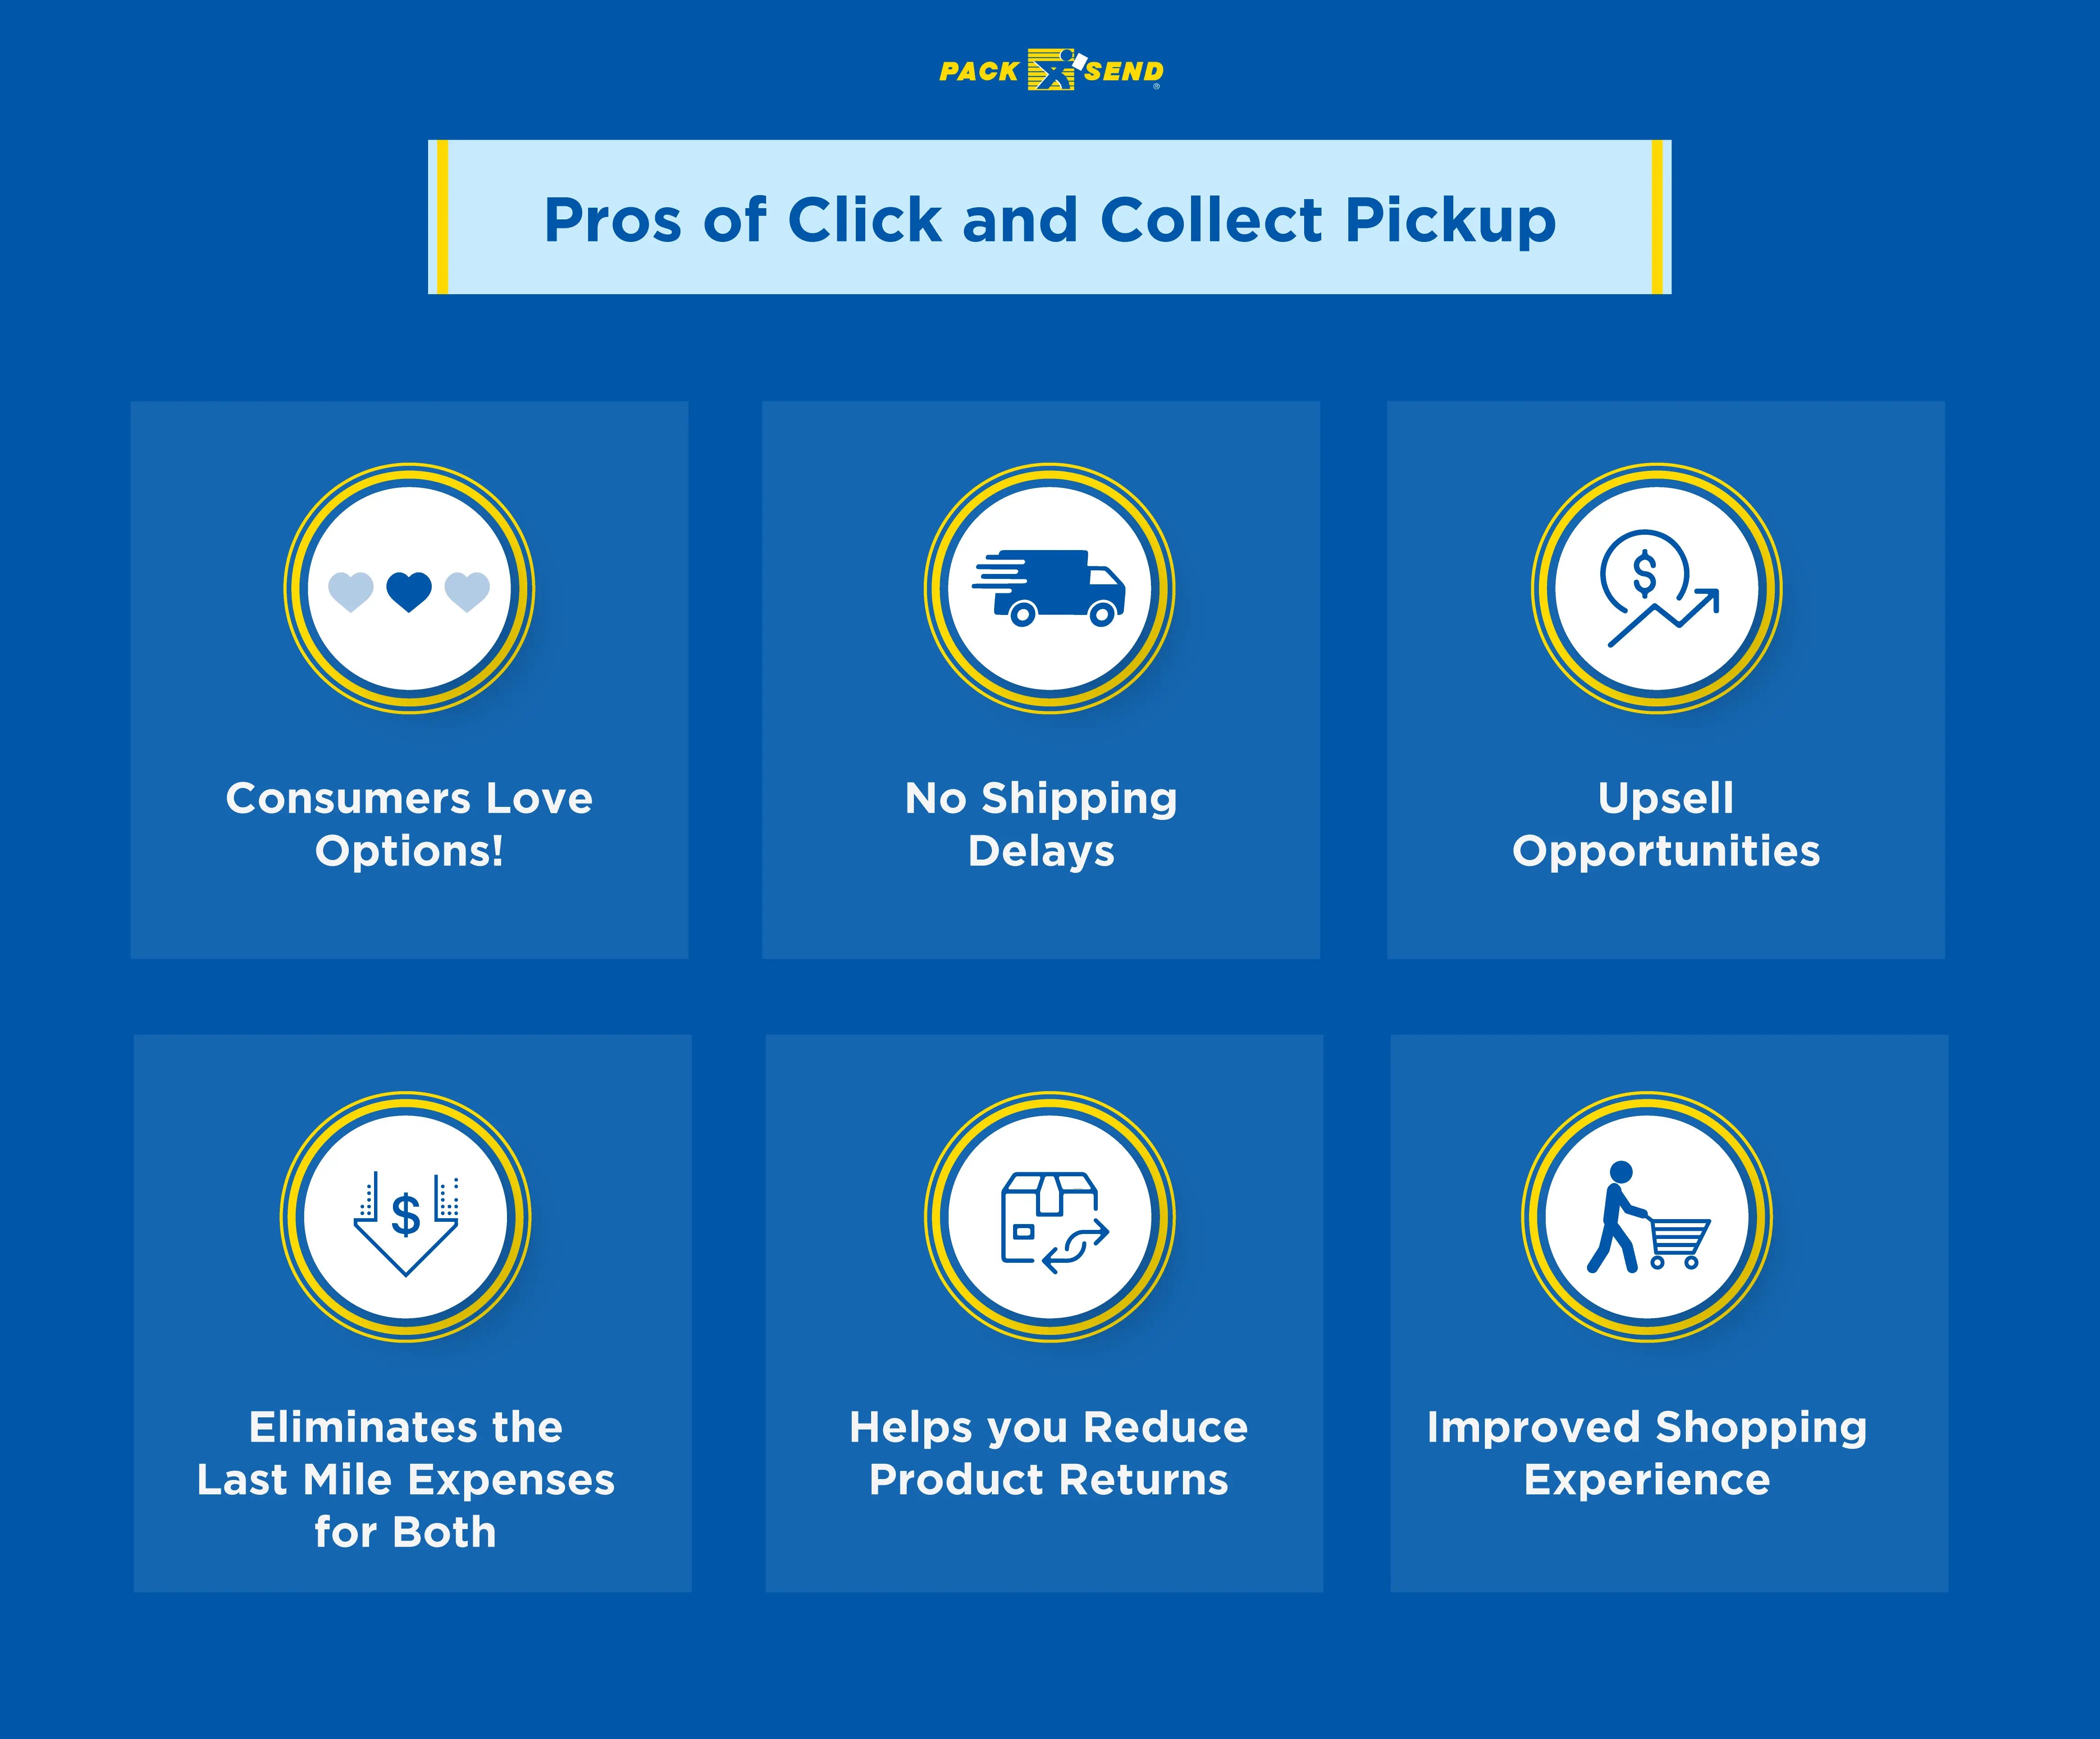 Pros-of-Click-and-Collect-Pickup